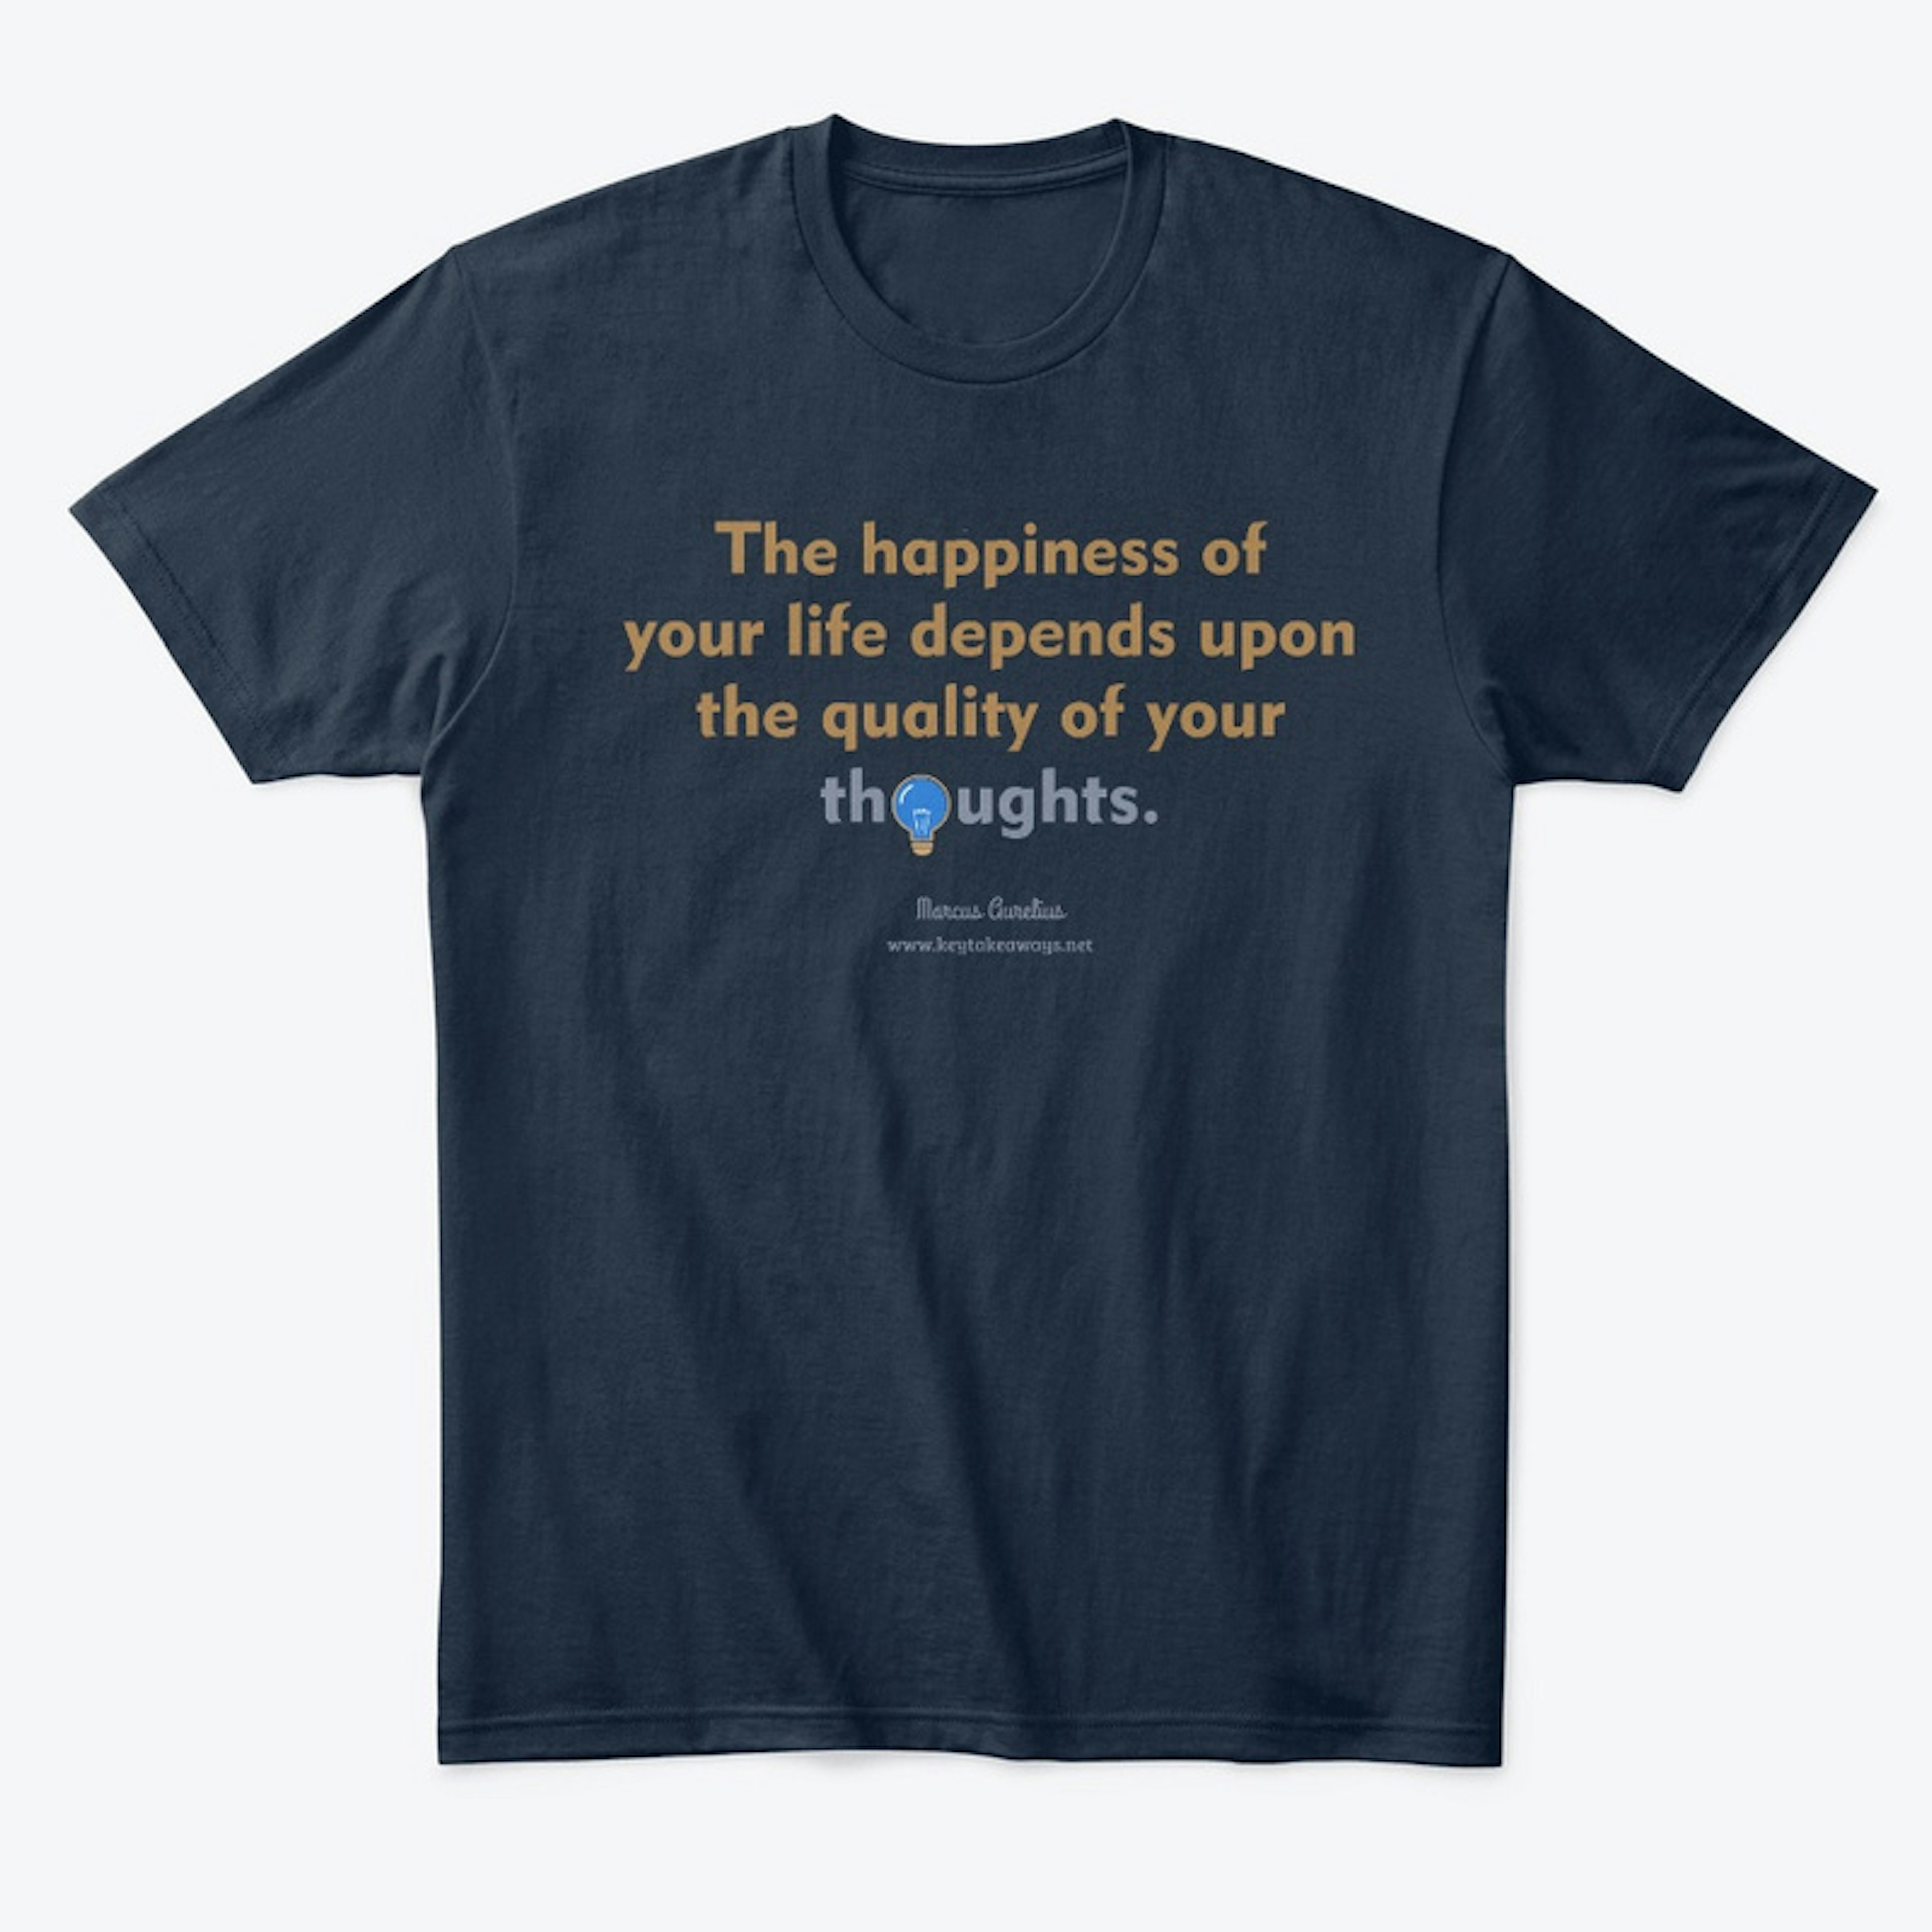 The happiness of your life